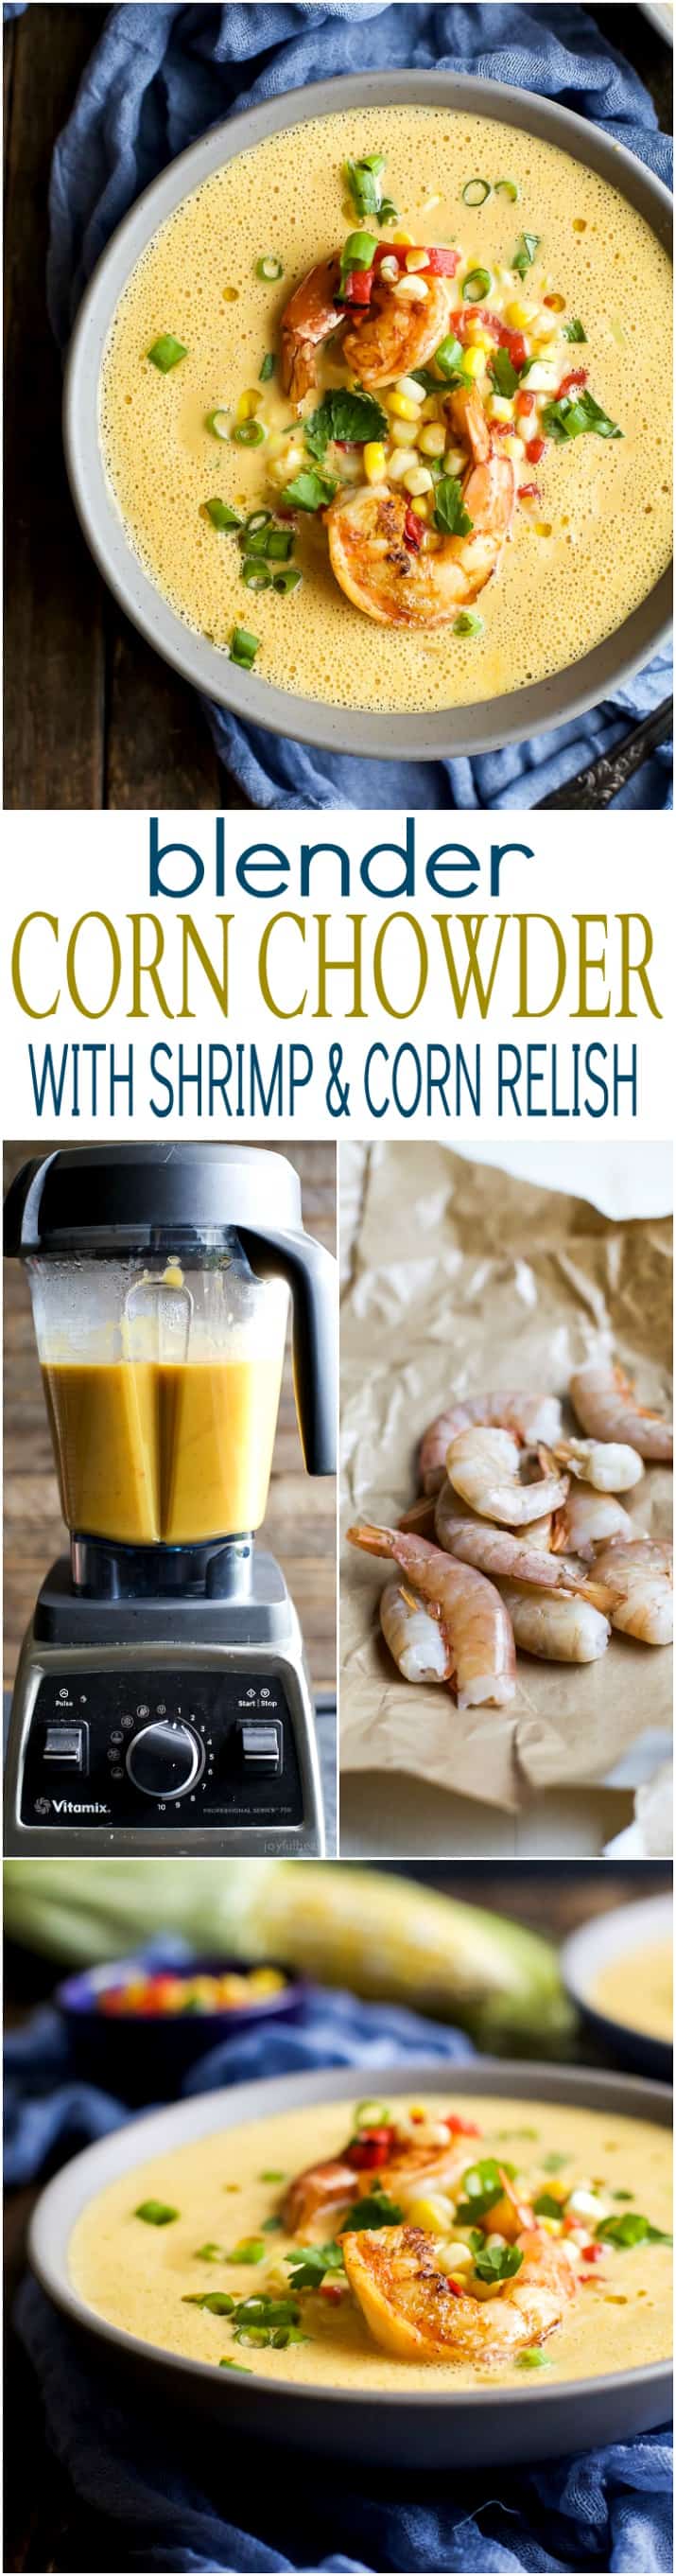 A collage of ingredients and text of Blender Corn Chowder with Shrimp and Corn Relish